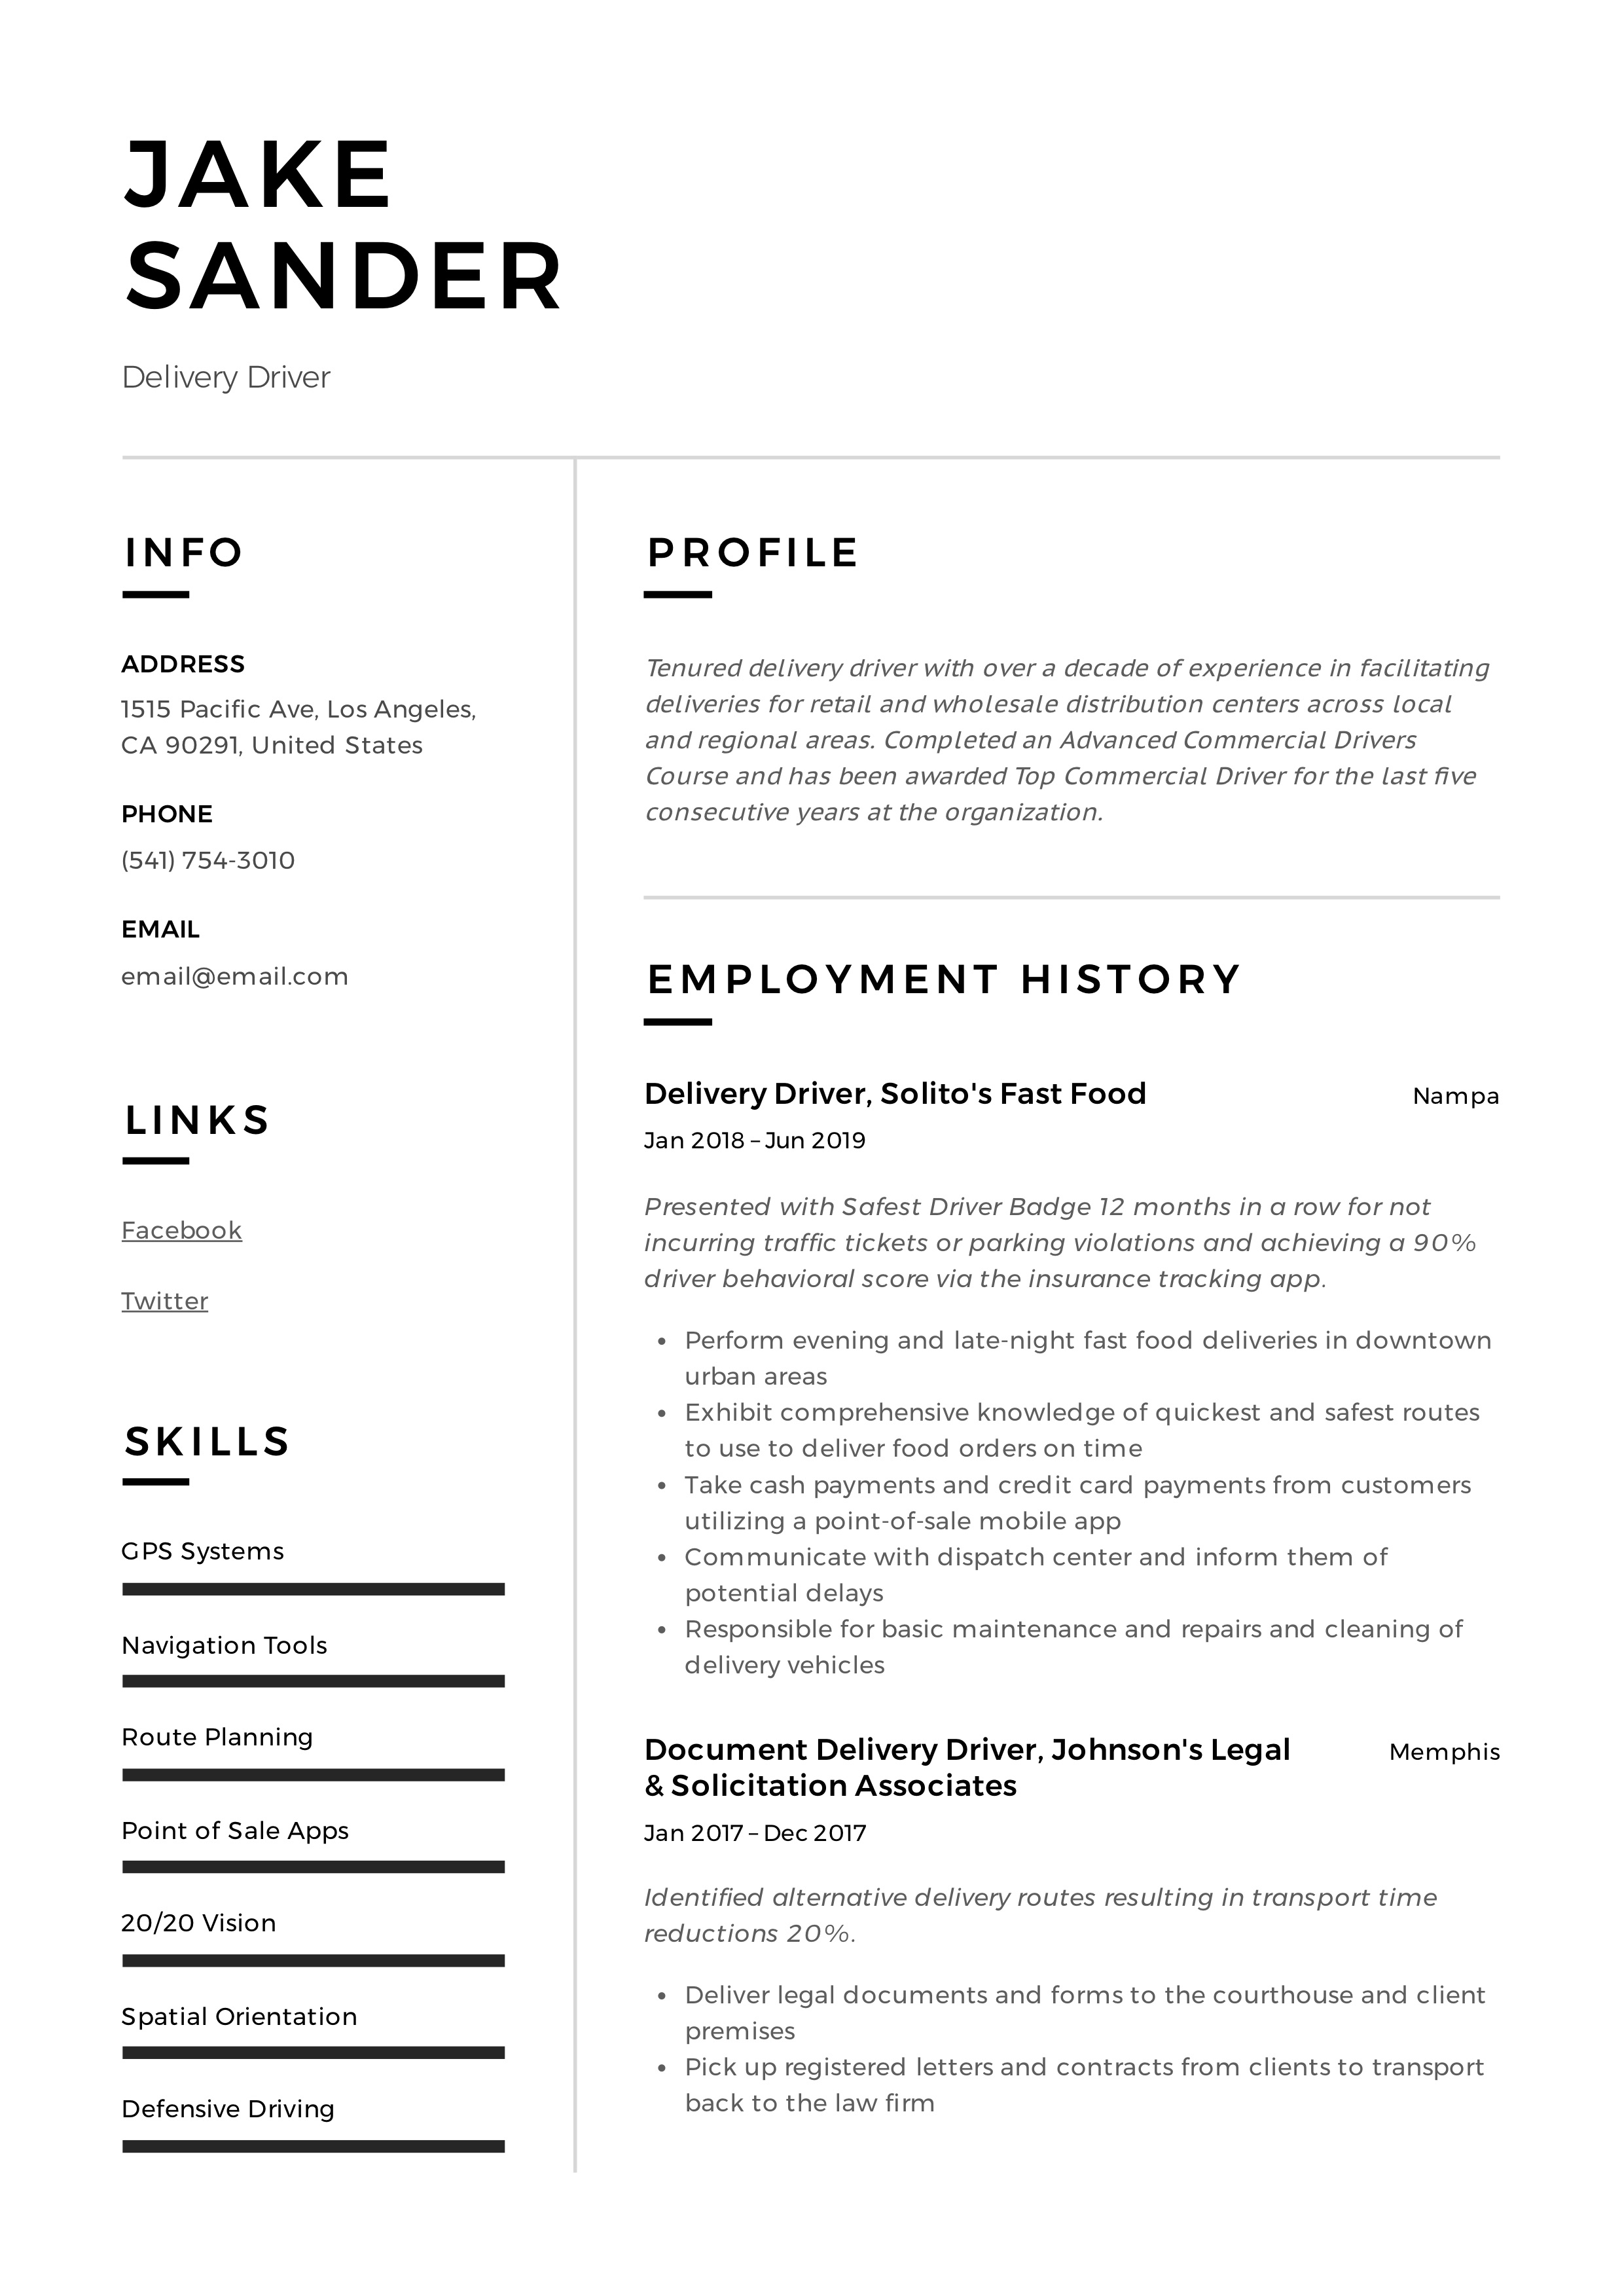 Delivery Driver Resume Writing Guide 12 Resume Examples 2019